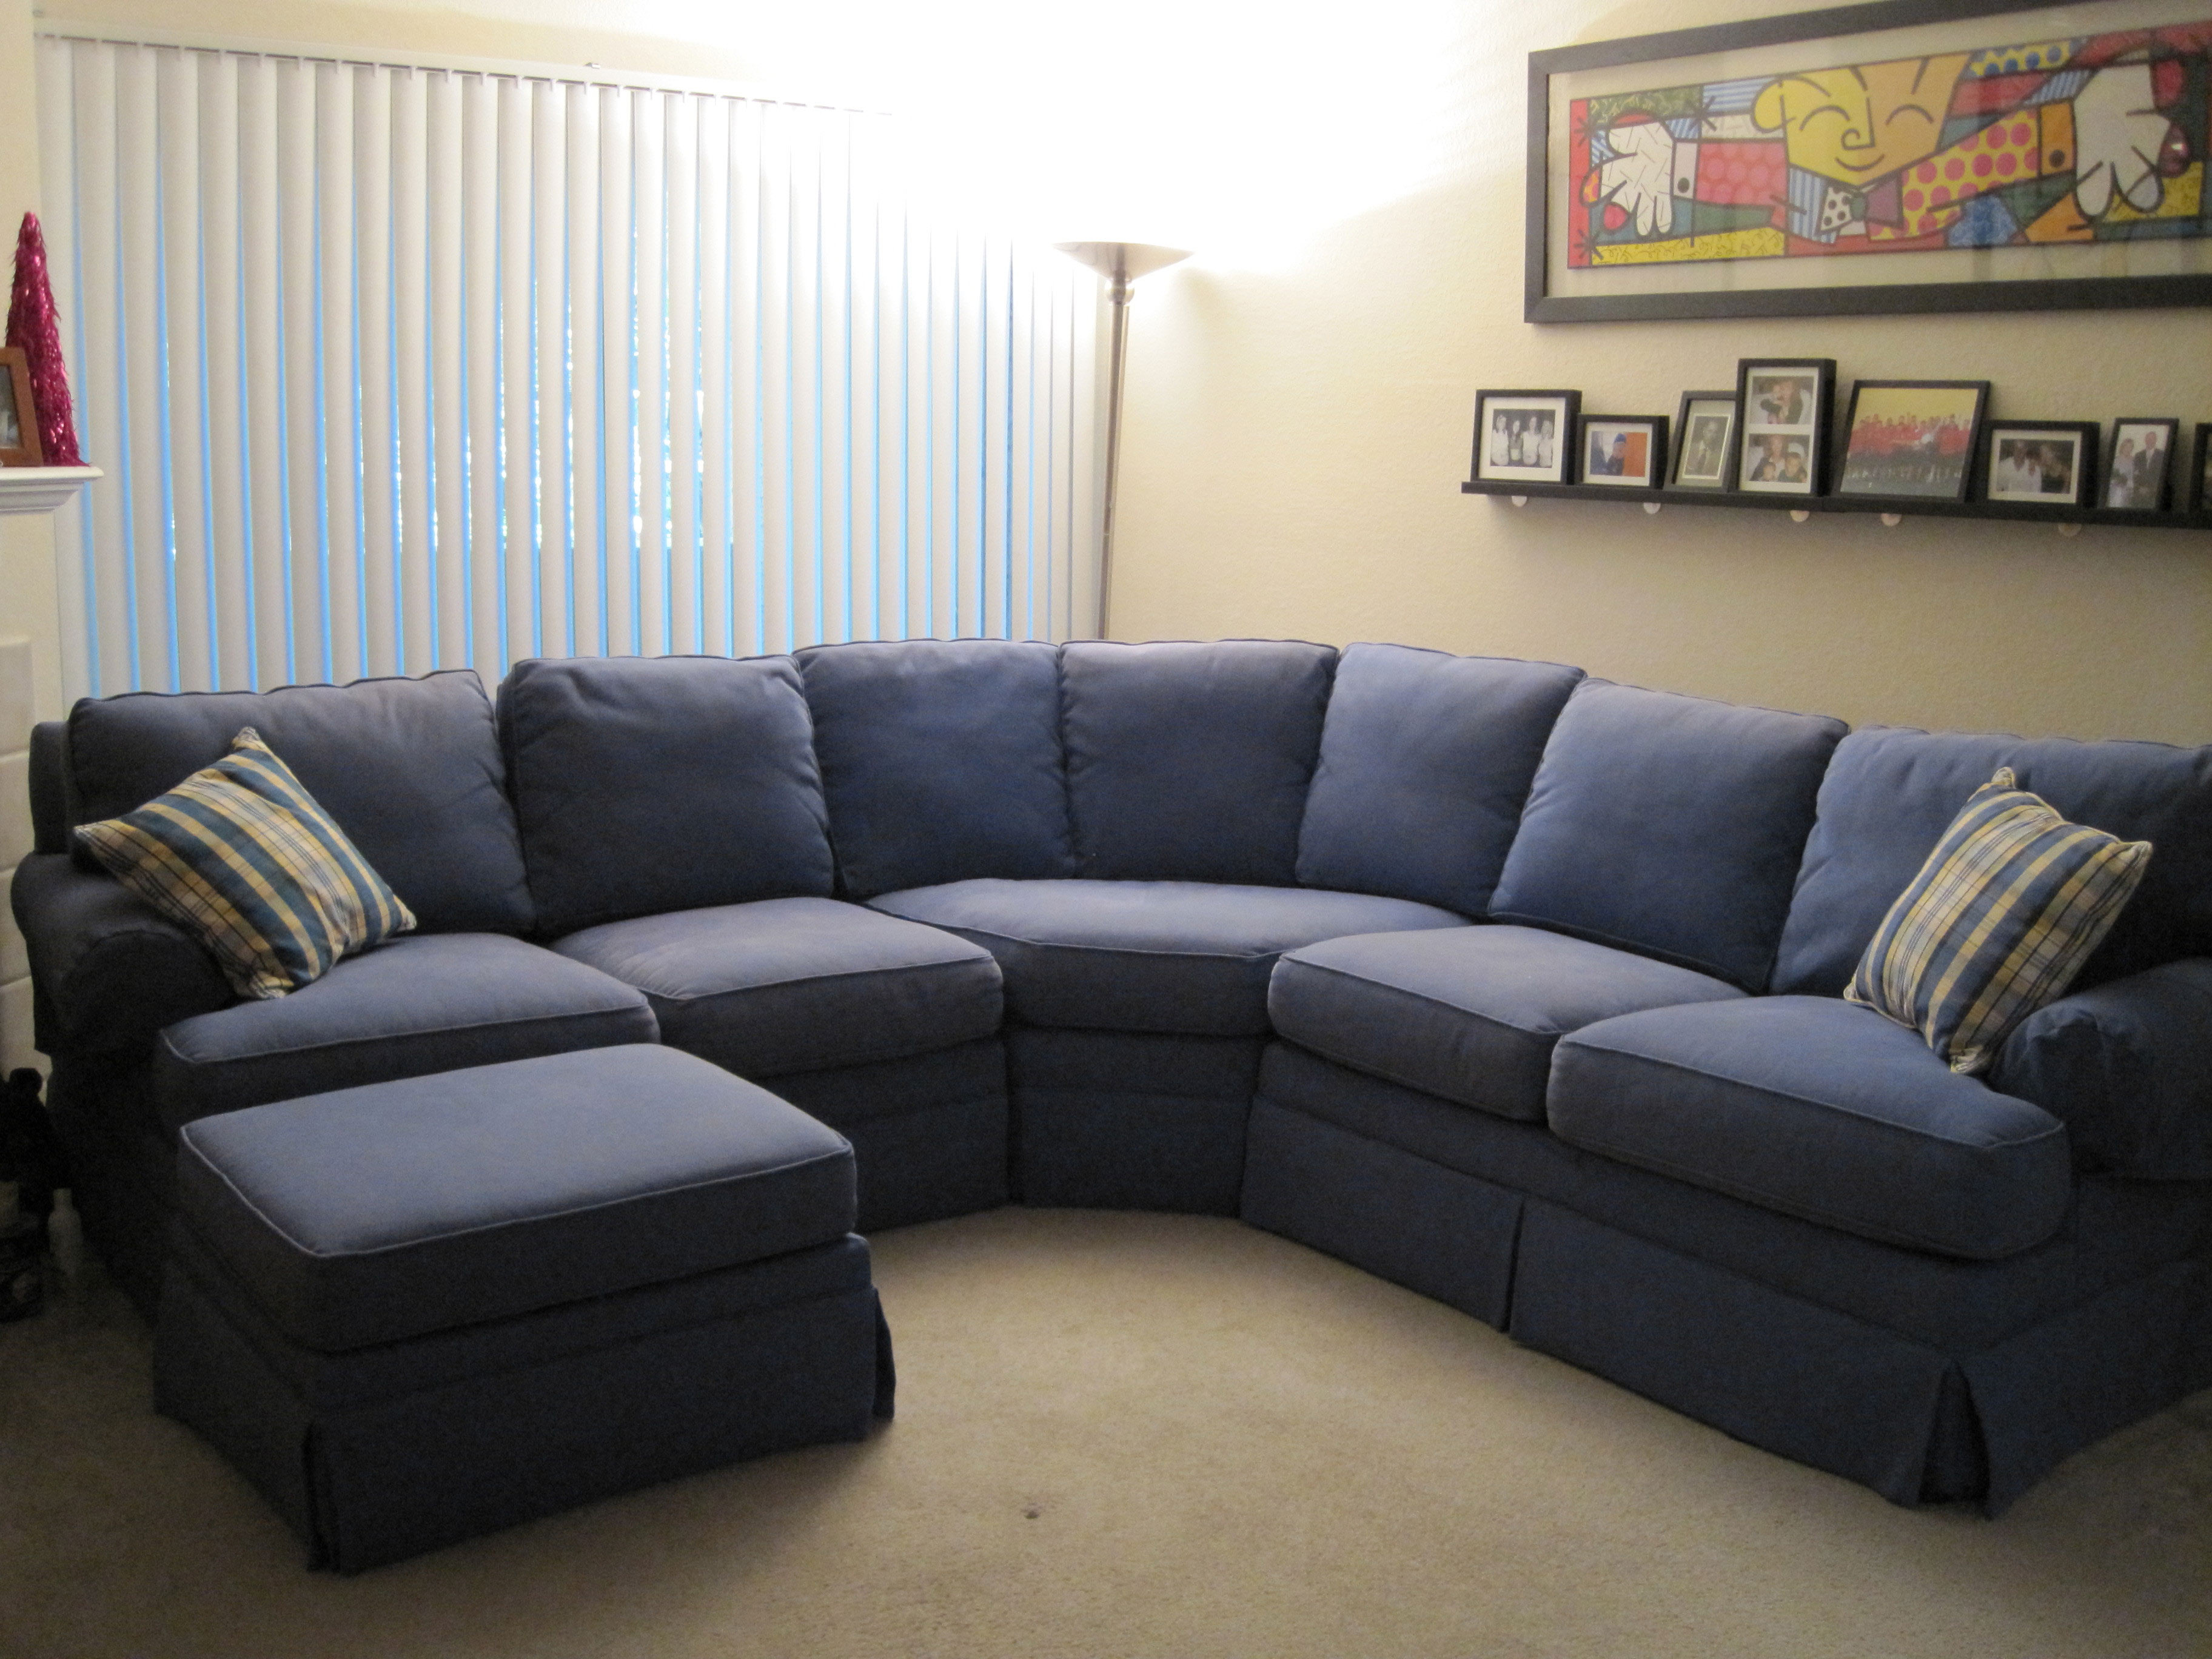 Small Living Room With Sectional Sofa